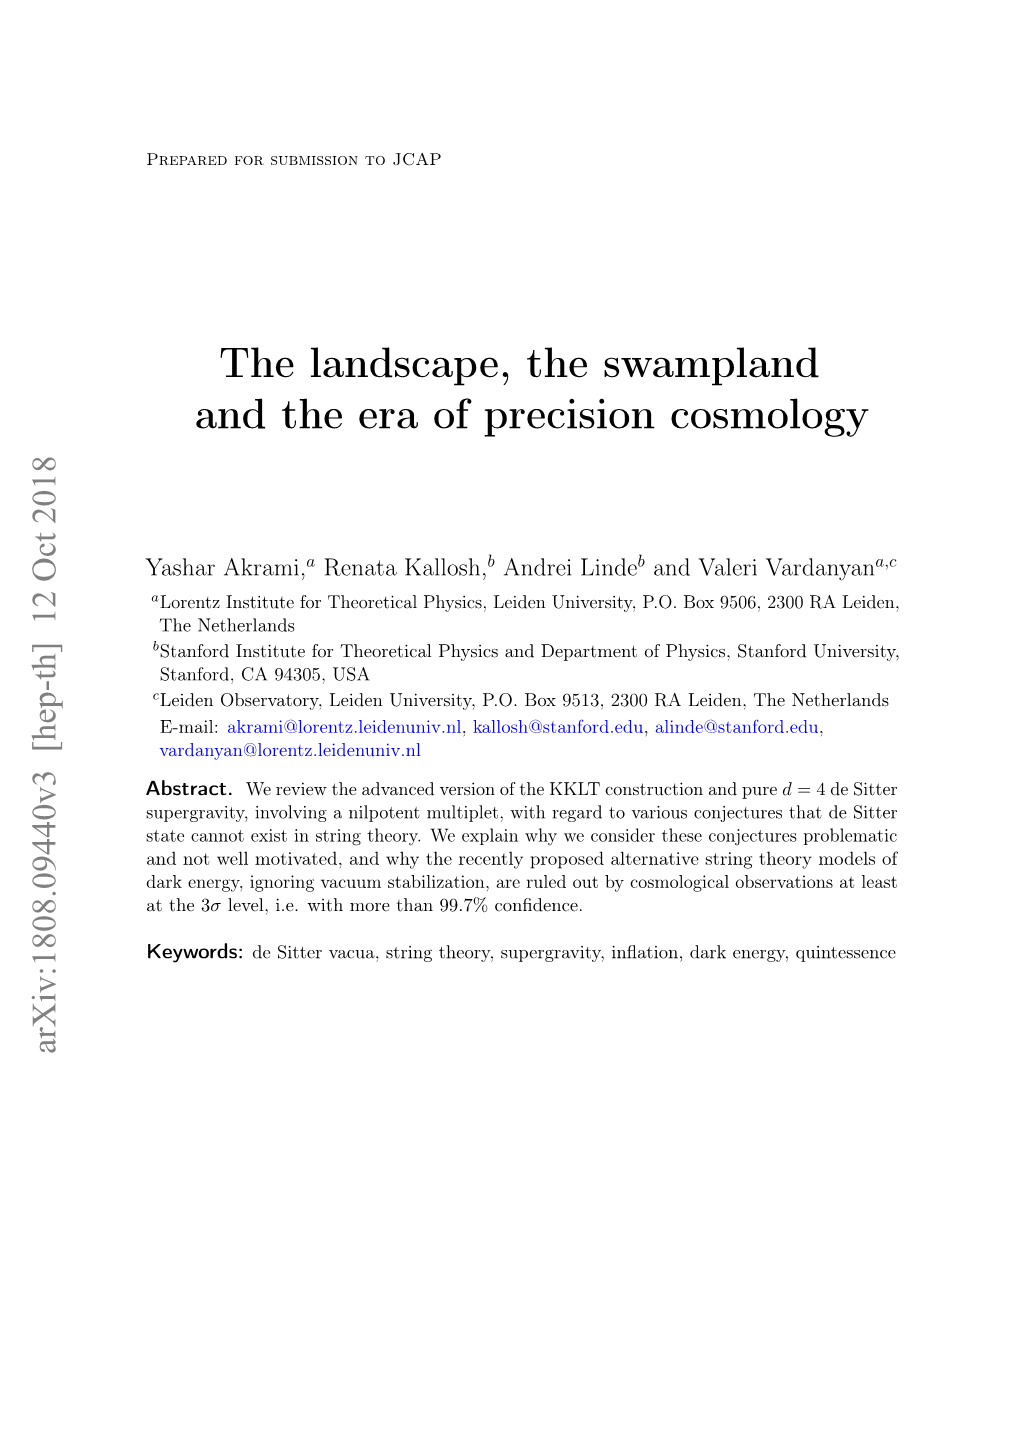 The Landscape, the Swampland and the Era of Precision Cosmology